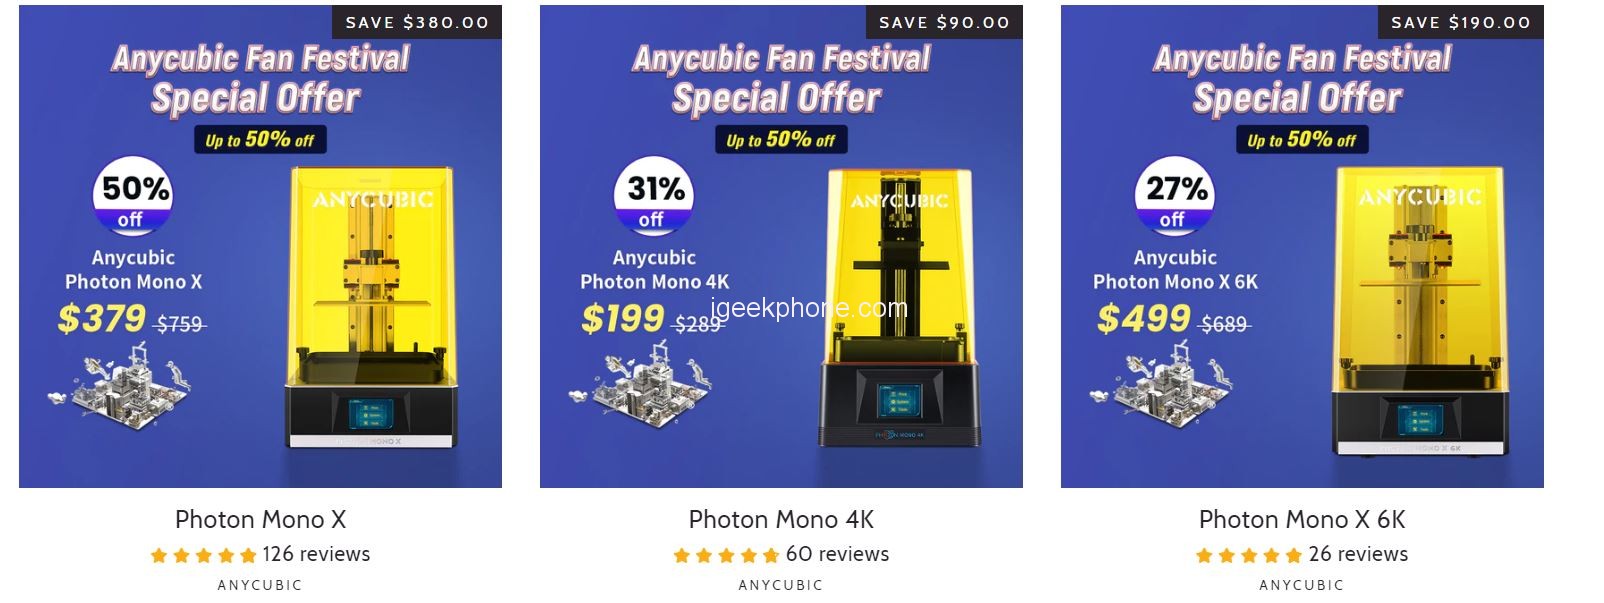 Anycubic Fan Festival Special Offer